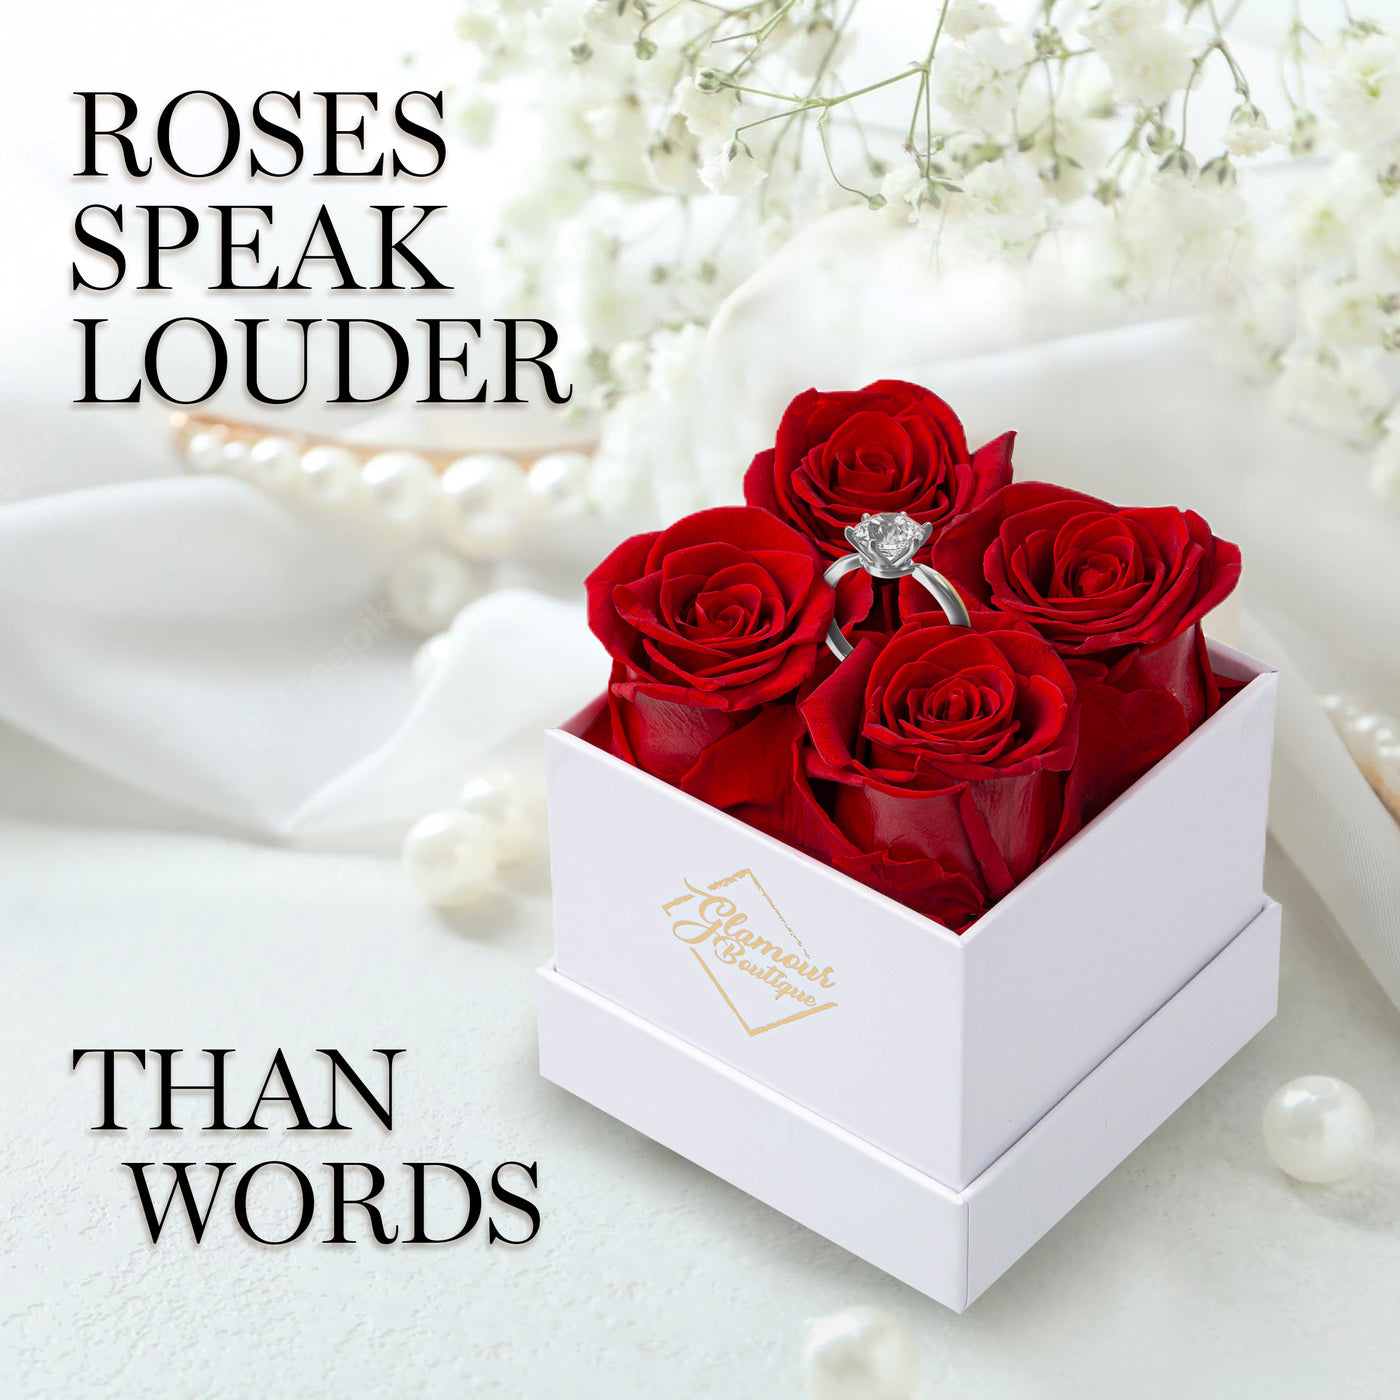 Preserved Roses in a Box - 4 Roses Flowers Decor  Cased in A Square Gift Box with Lid - Pink